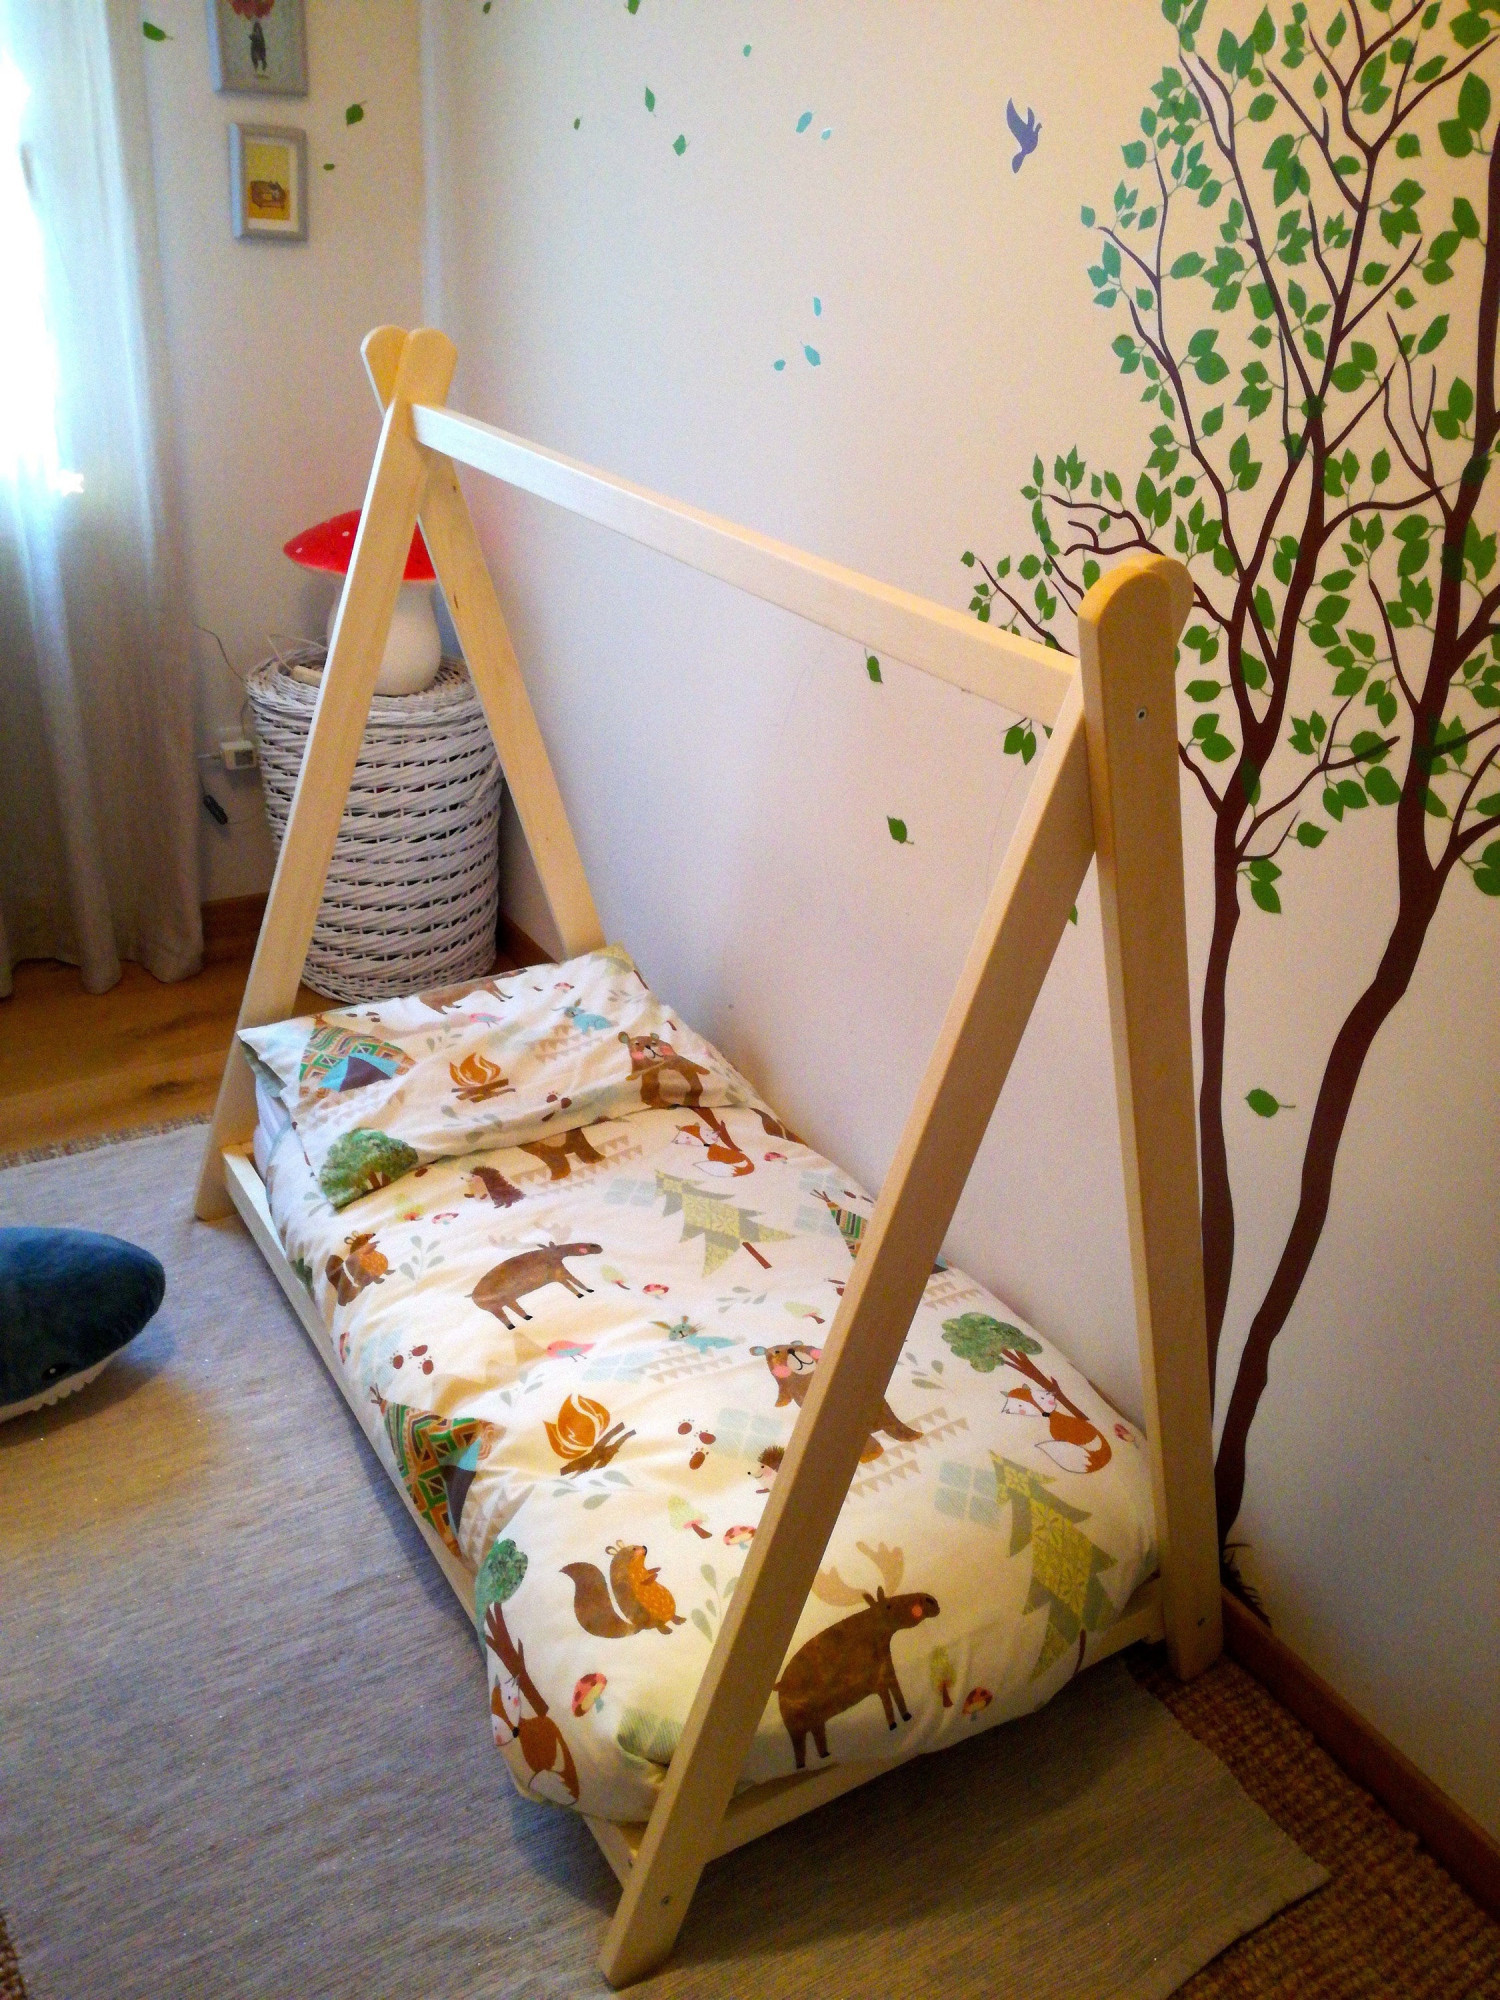 Toddler house bed, Montessori floor bed, teepee bed, kid bed, wood bed